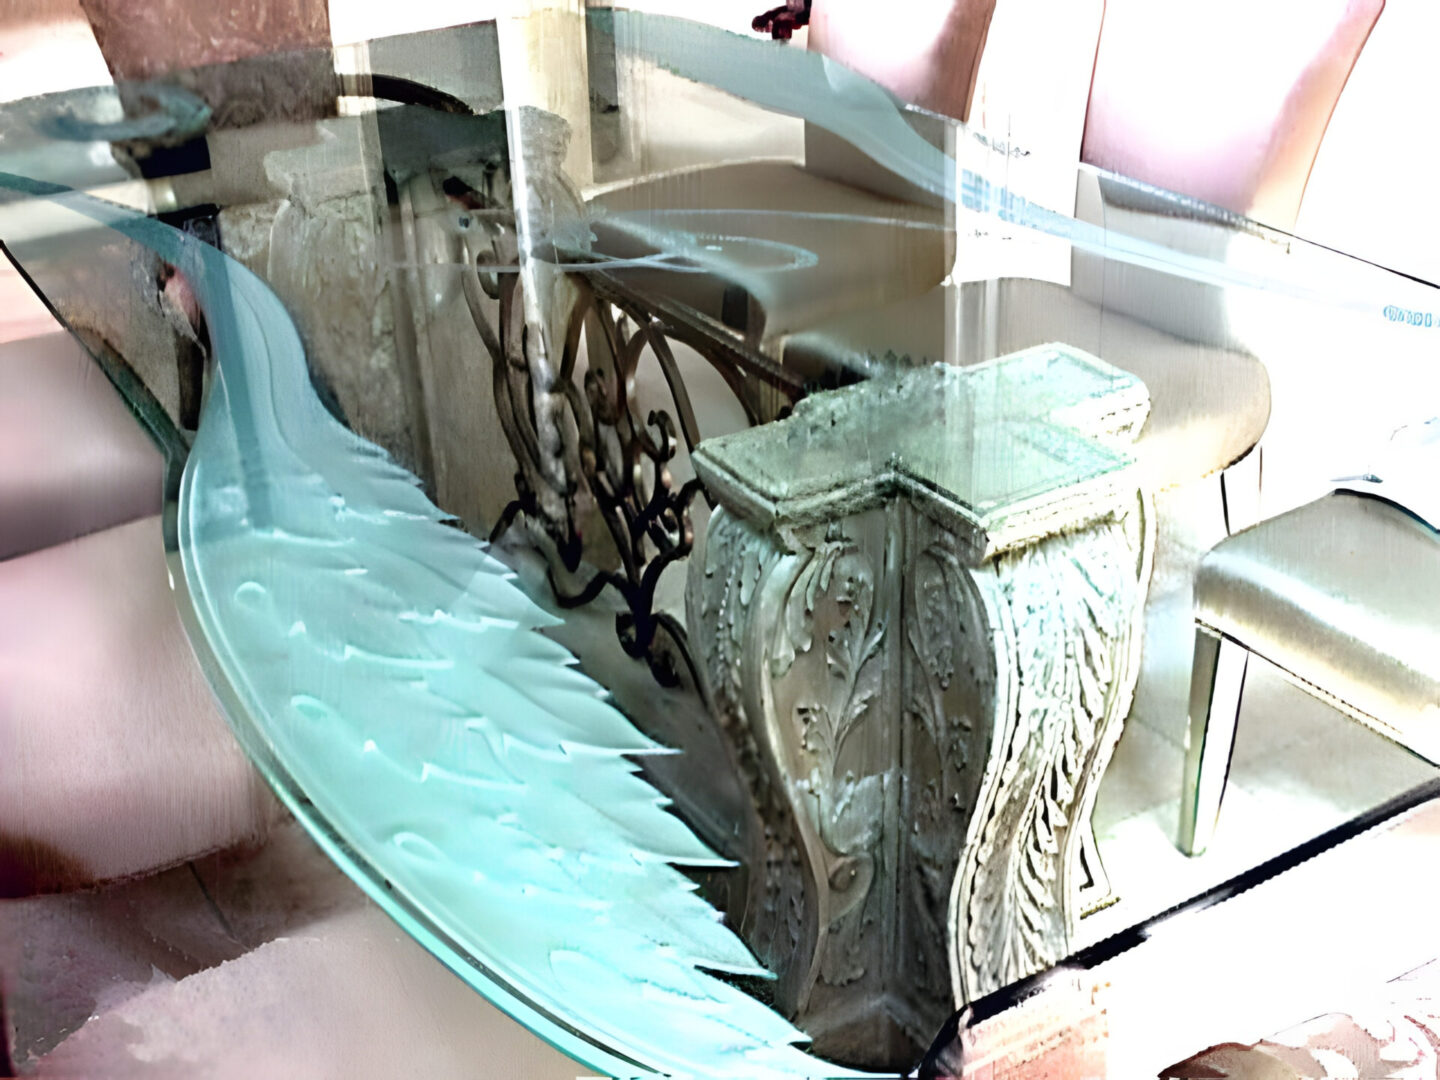 An ornately carved table base supporting a glass tabletop in a room with chairs and a reflection visible on the surface.